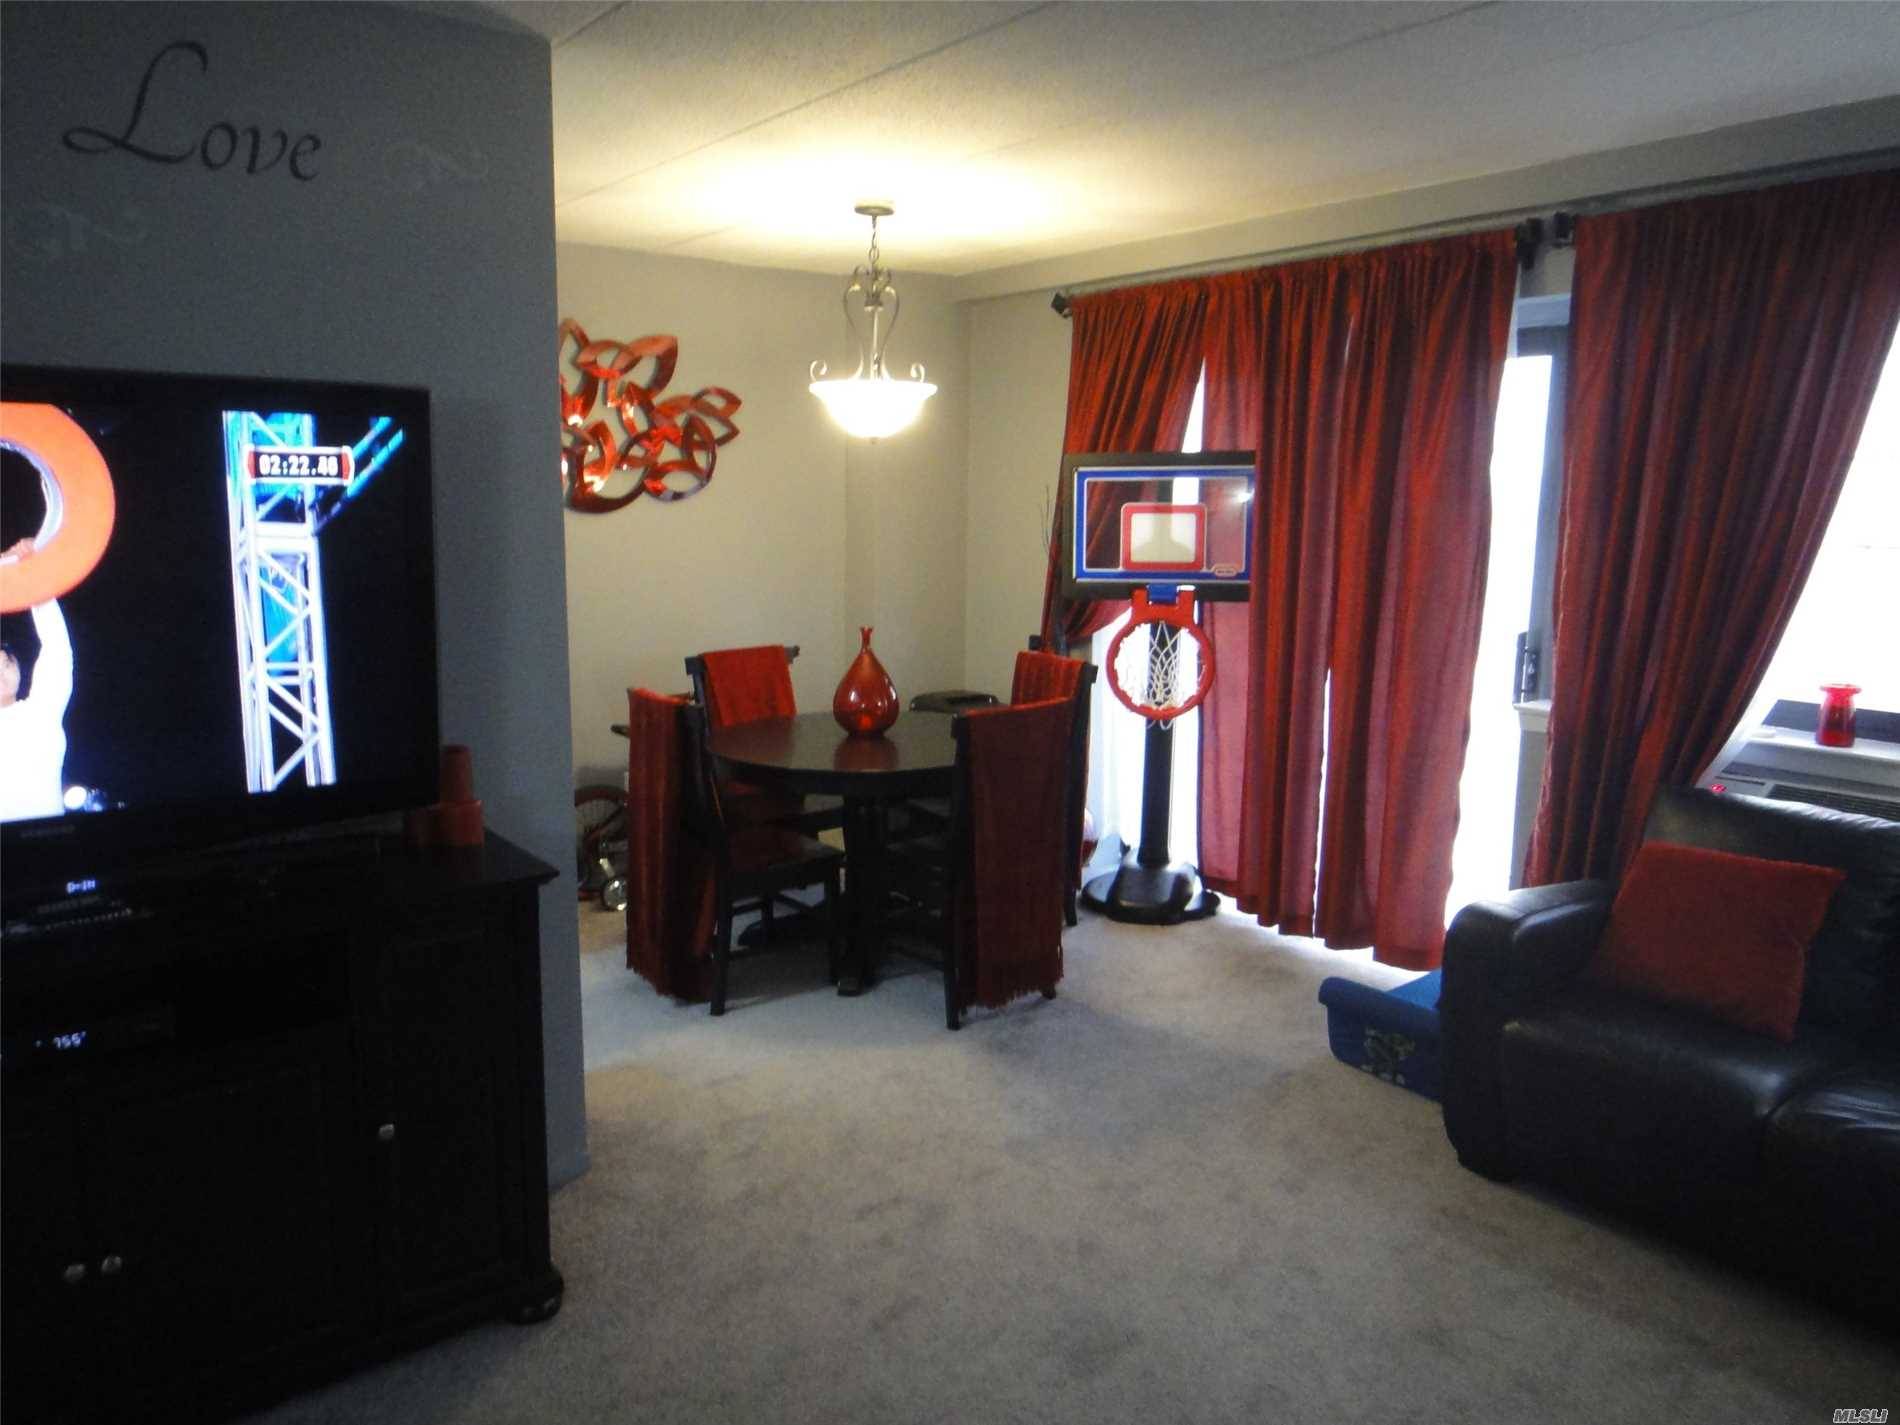 This Is A Two Bedroom Two Bath Condo Apartment On The 12 Floor.